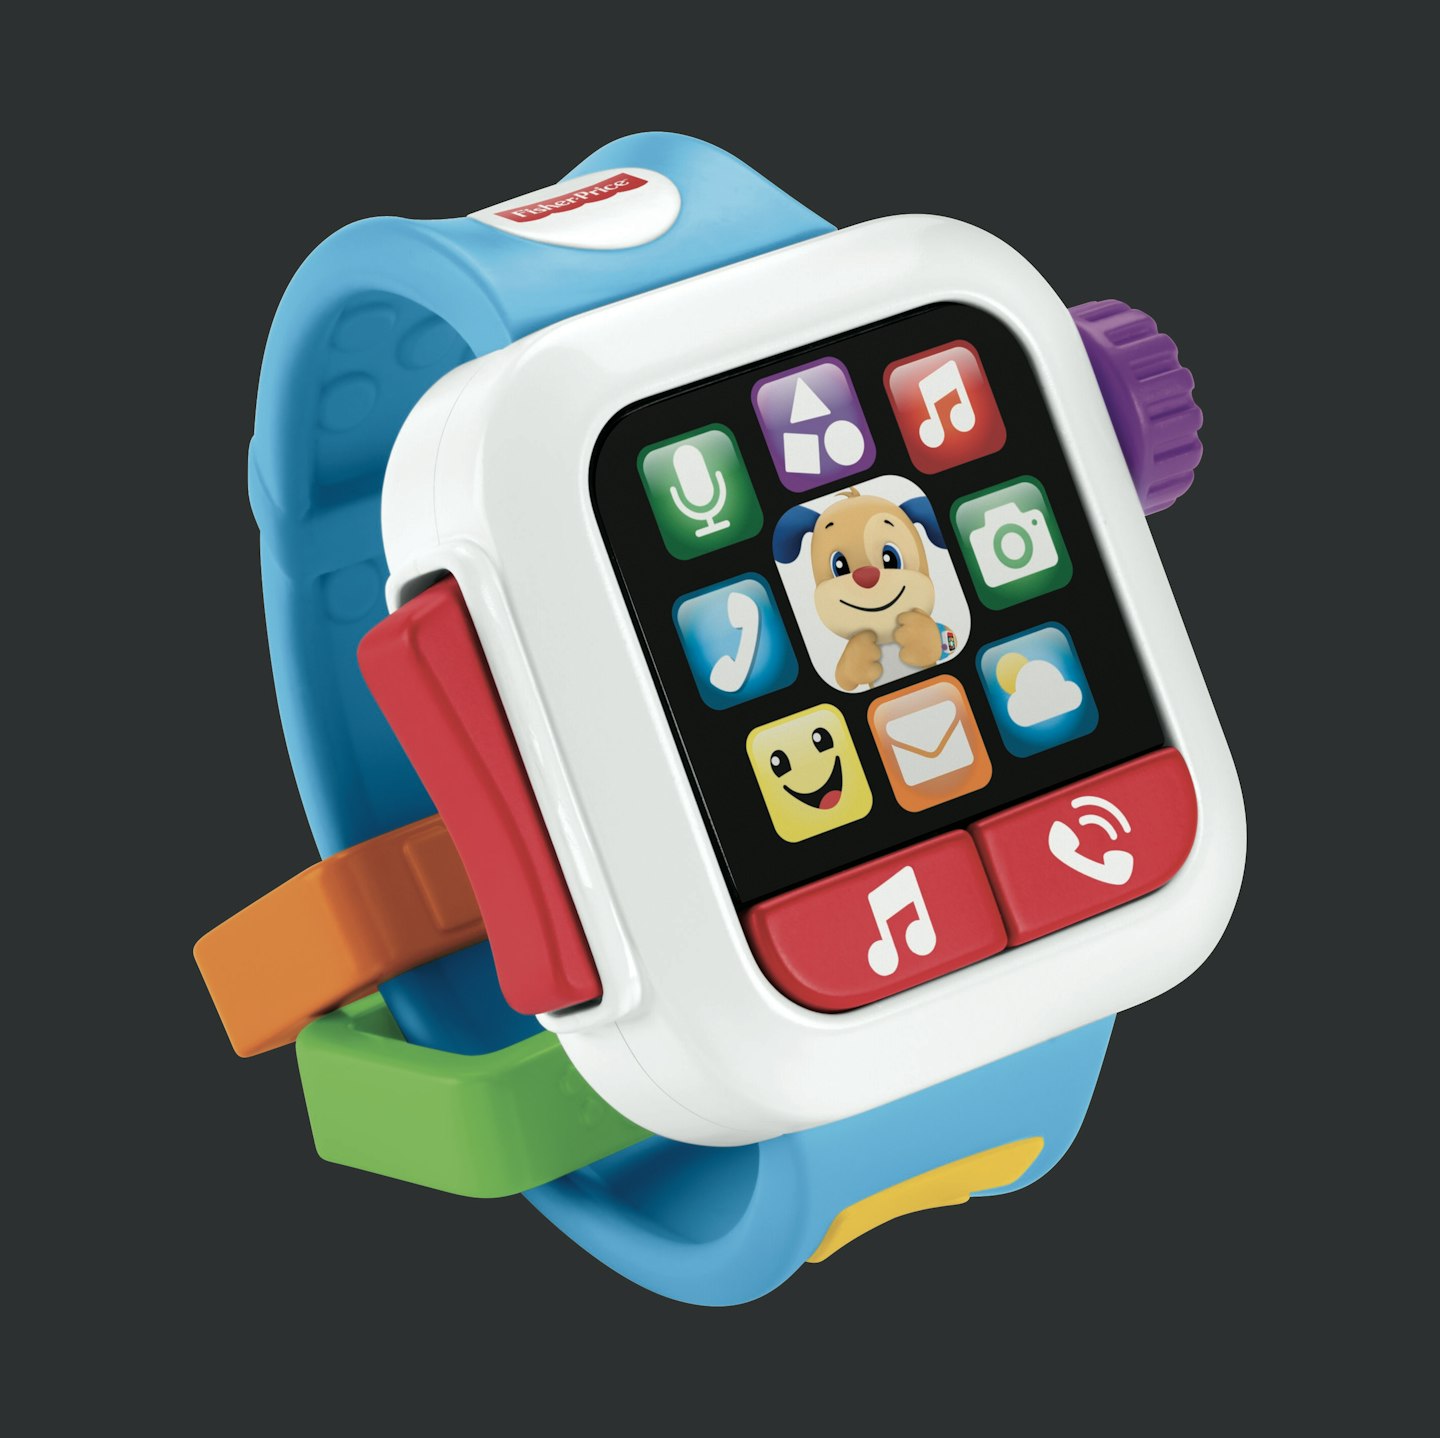 
Fisher-Price Laugh & Learn Time to Learn Smart Watch 

